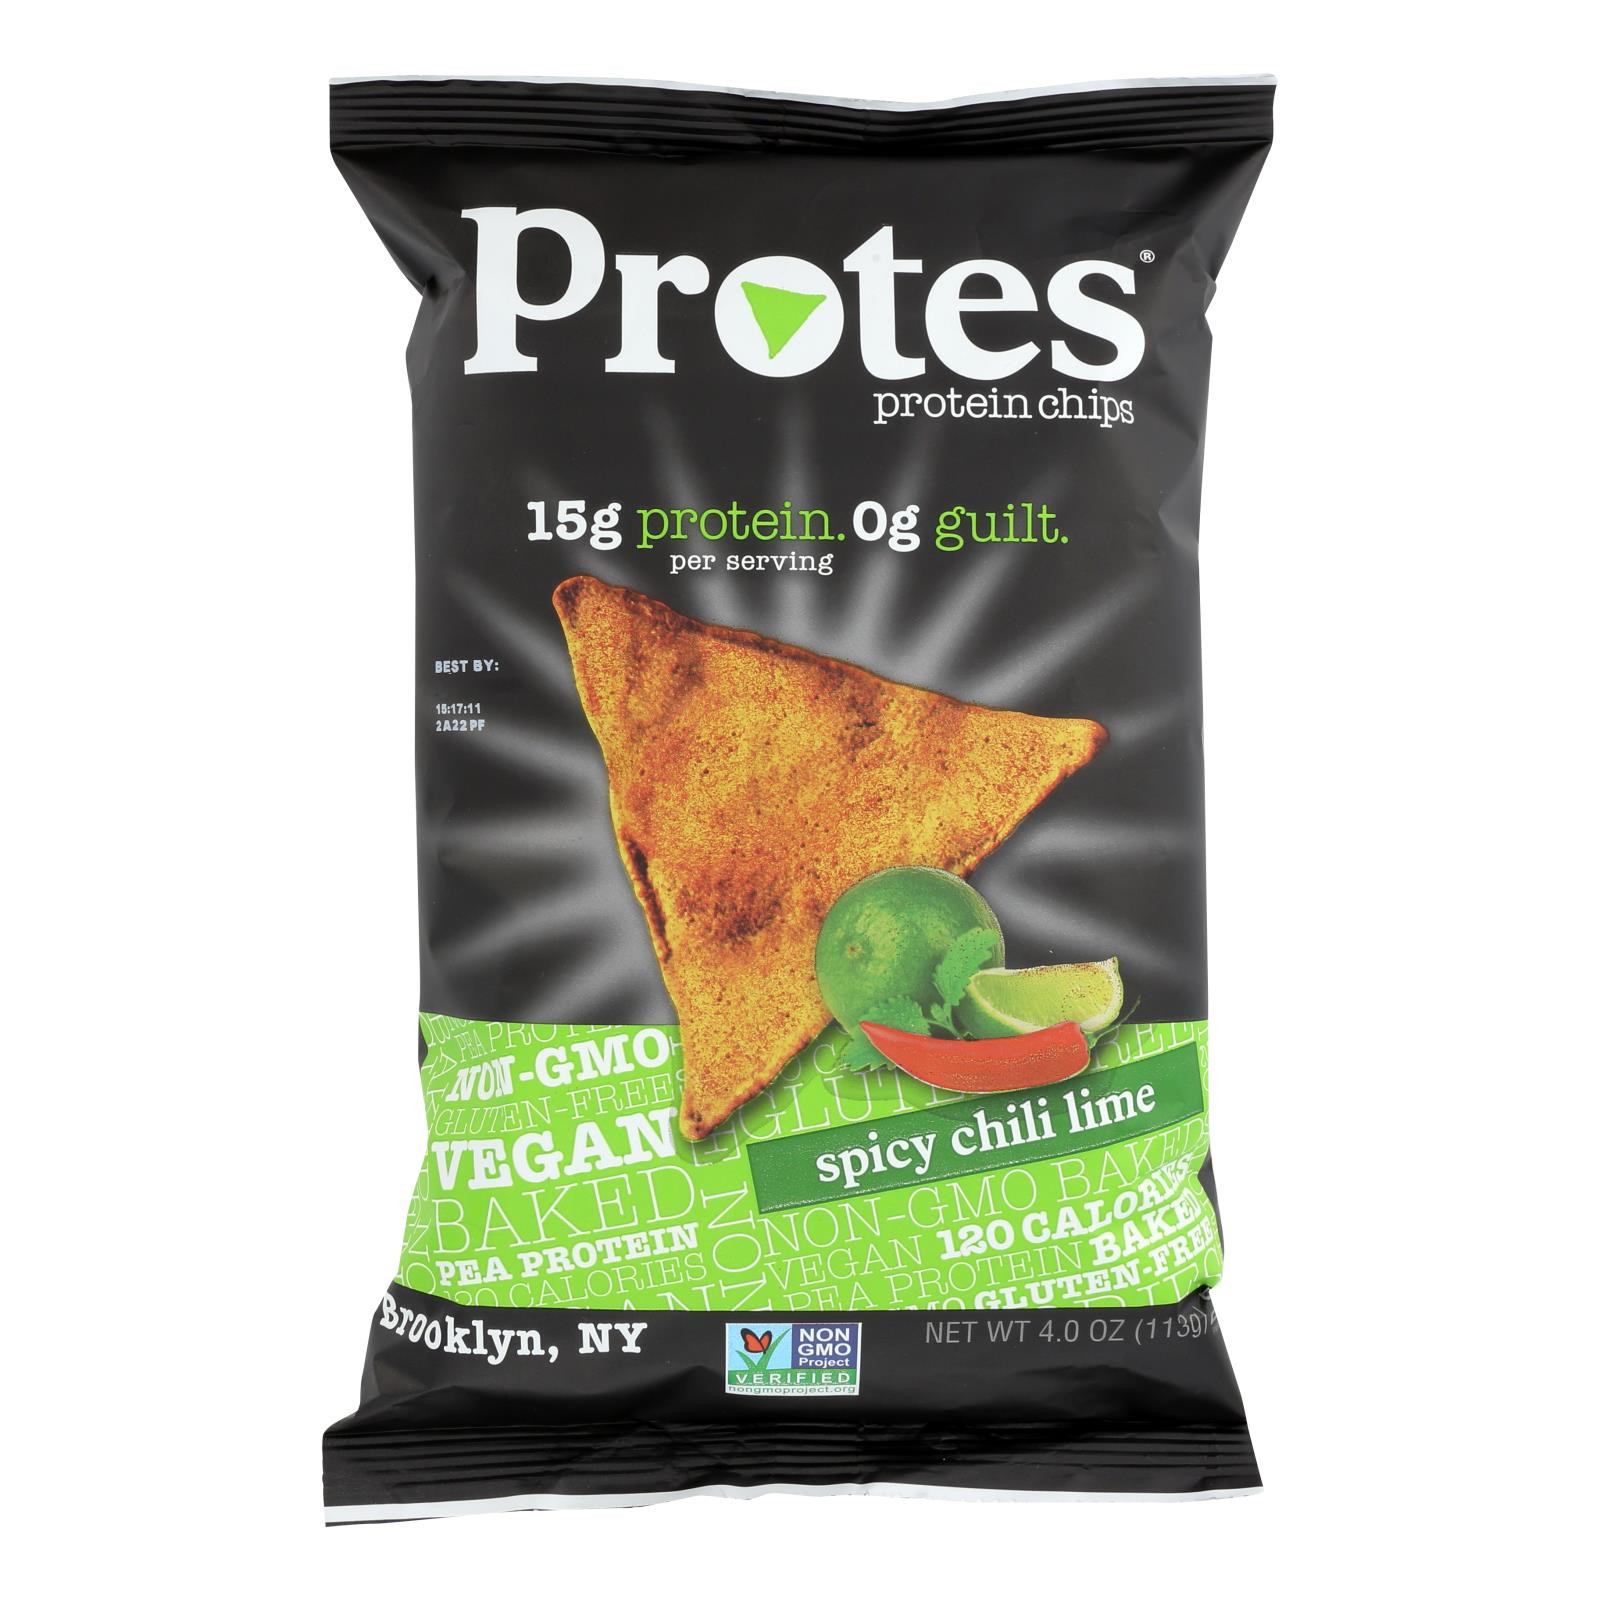 Protes Protein Chips - Chips Prtin Spicy Chli Lim - Case of 12 - 4 OZ